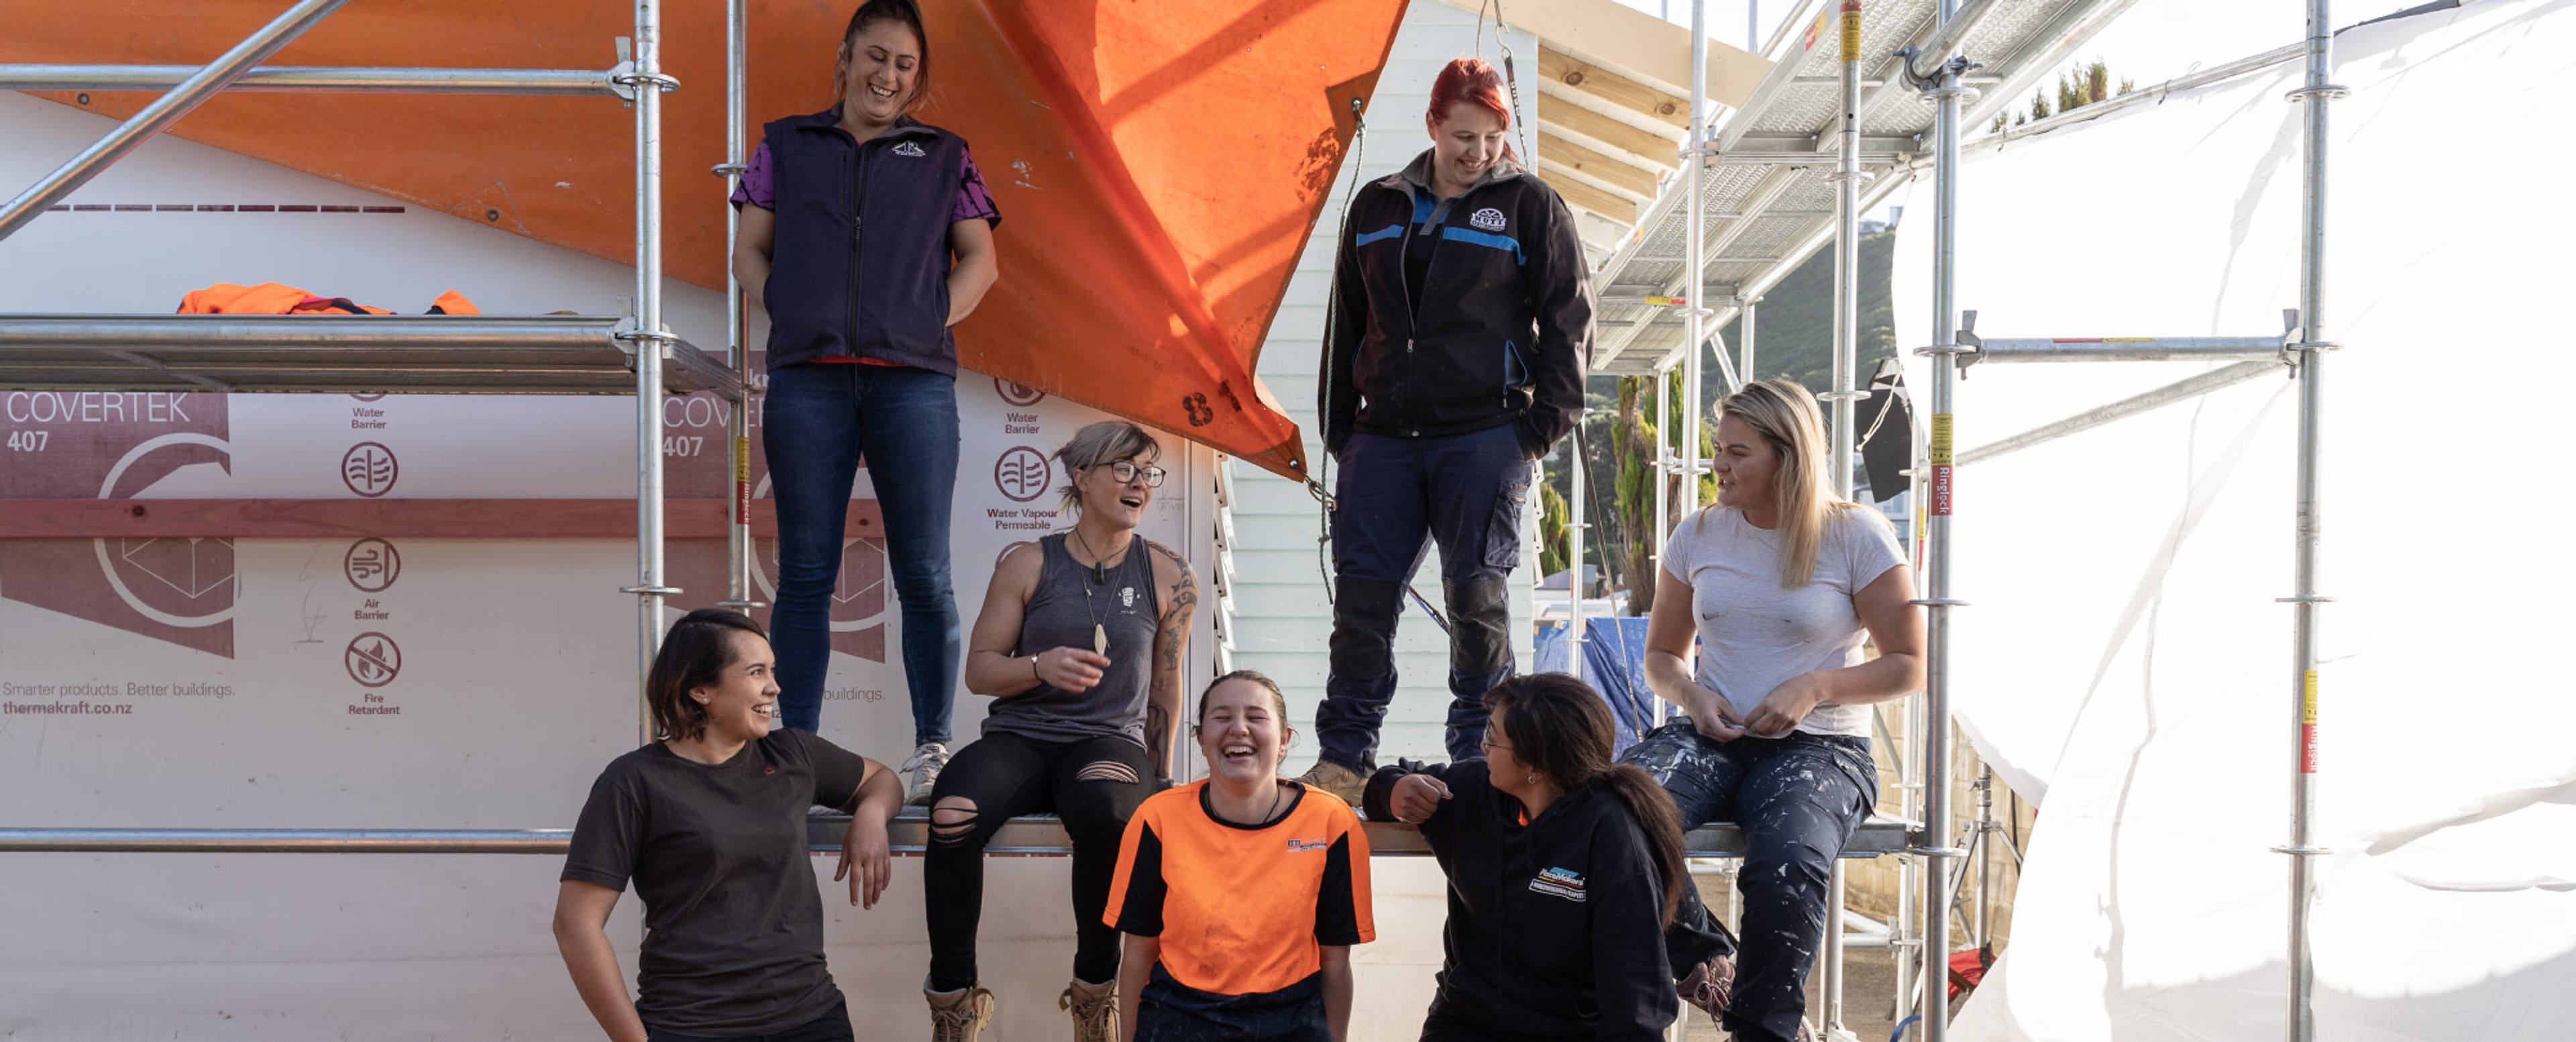  A group of women laughing together on scaffolding 